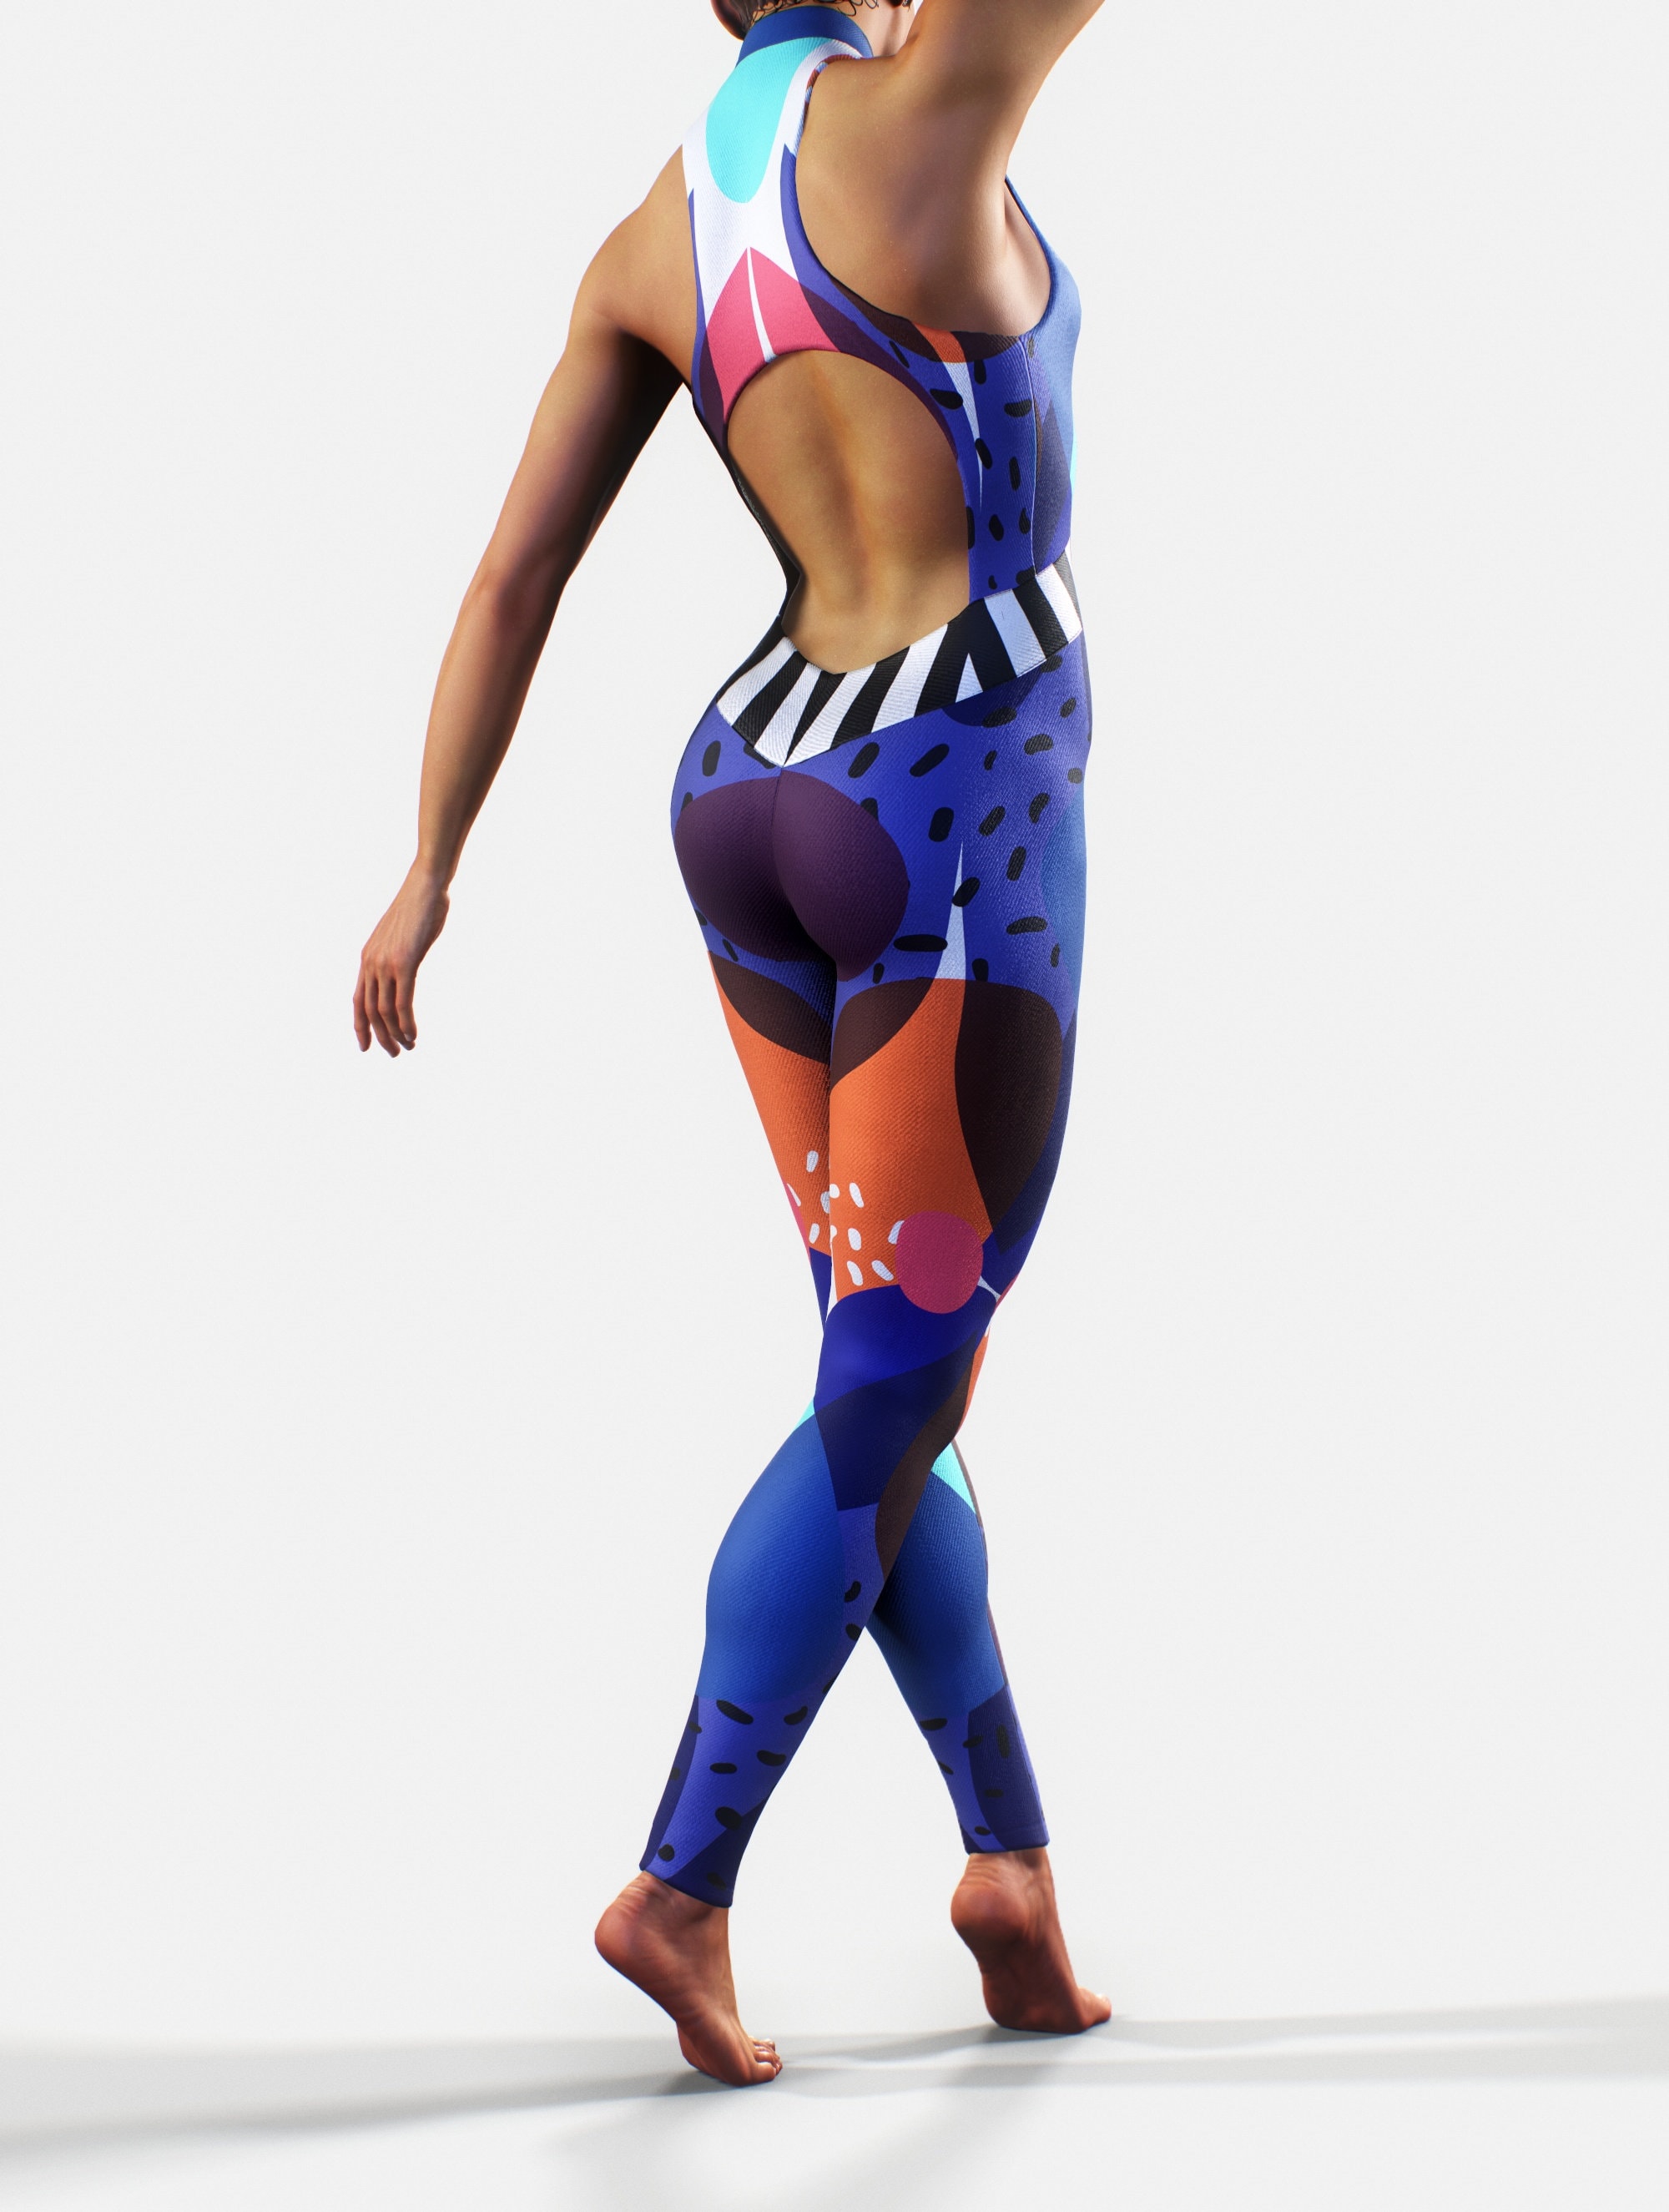 Female Spring sports Jogging Full Outfit - pafetoda